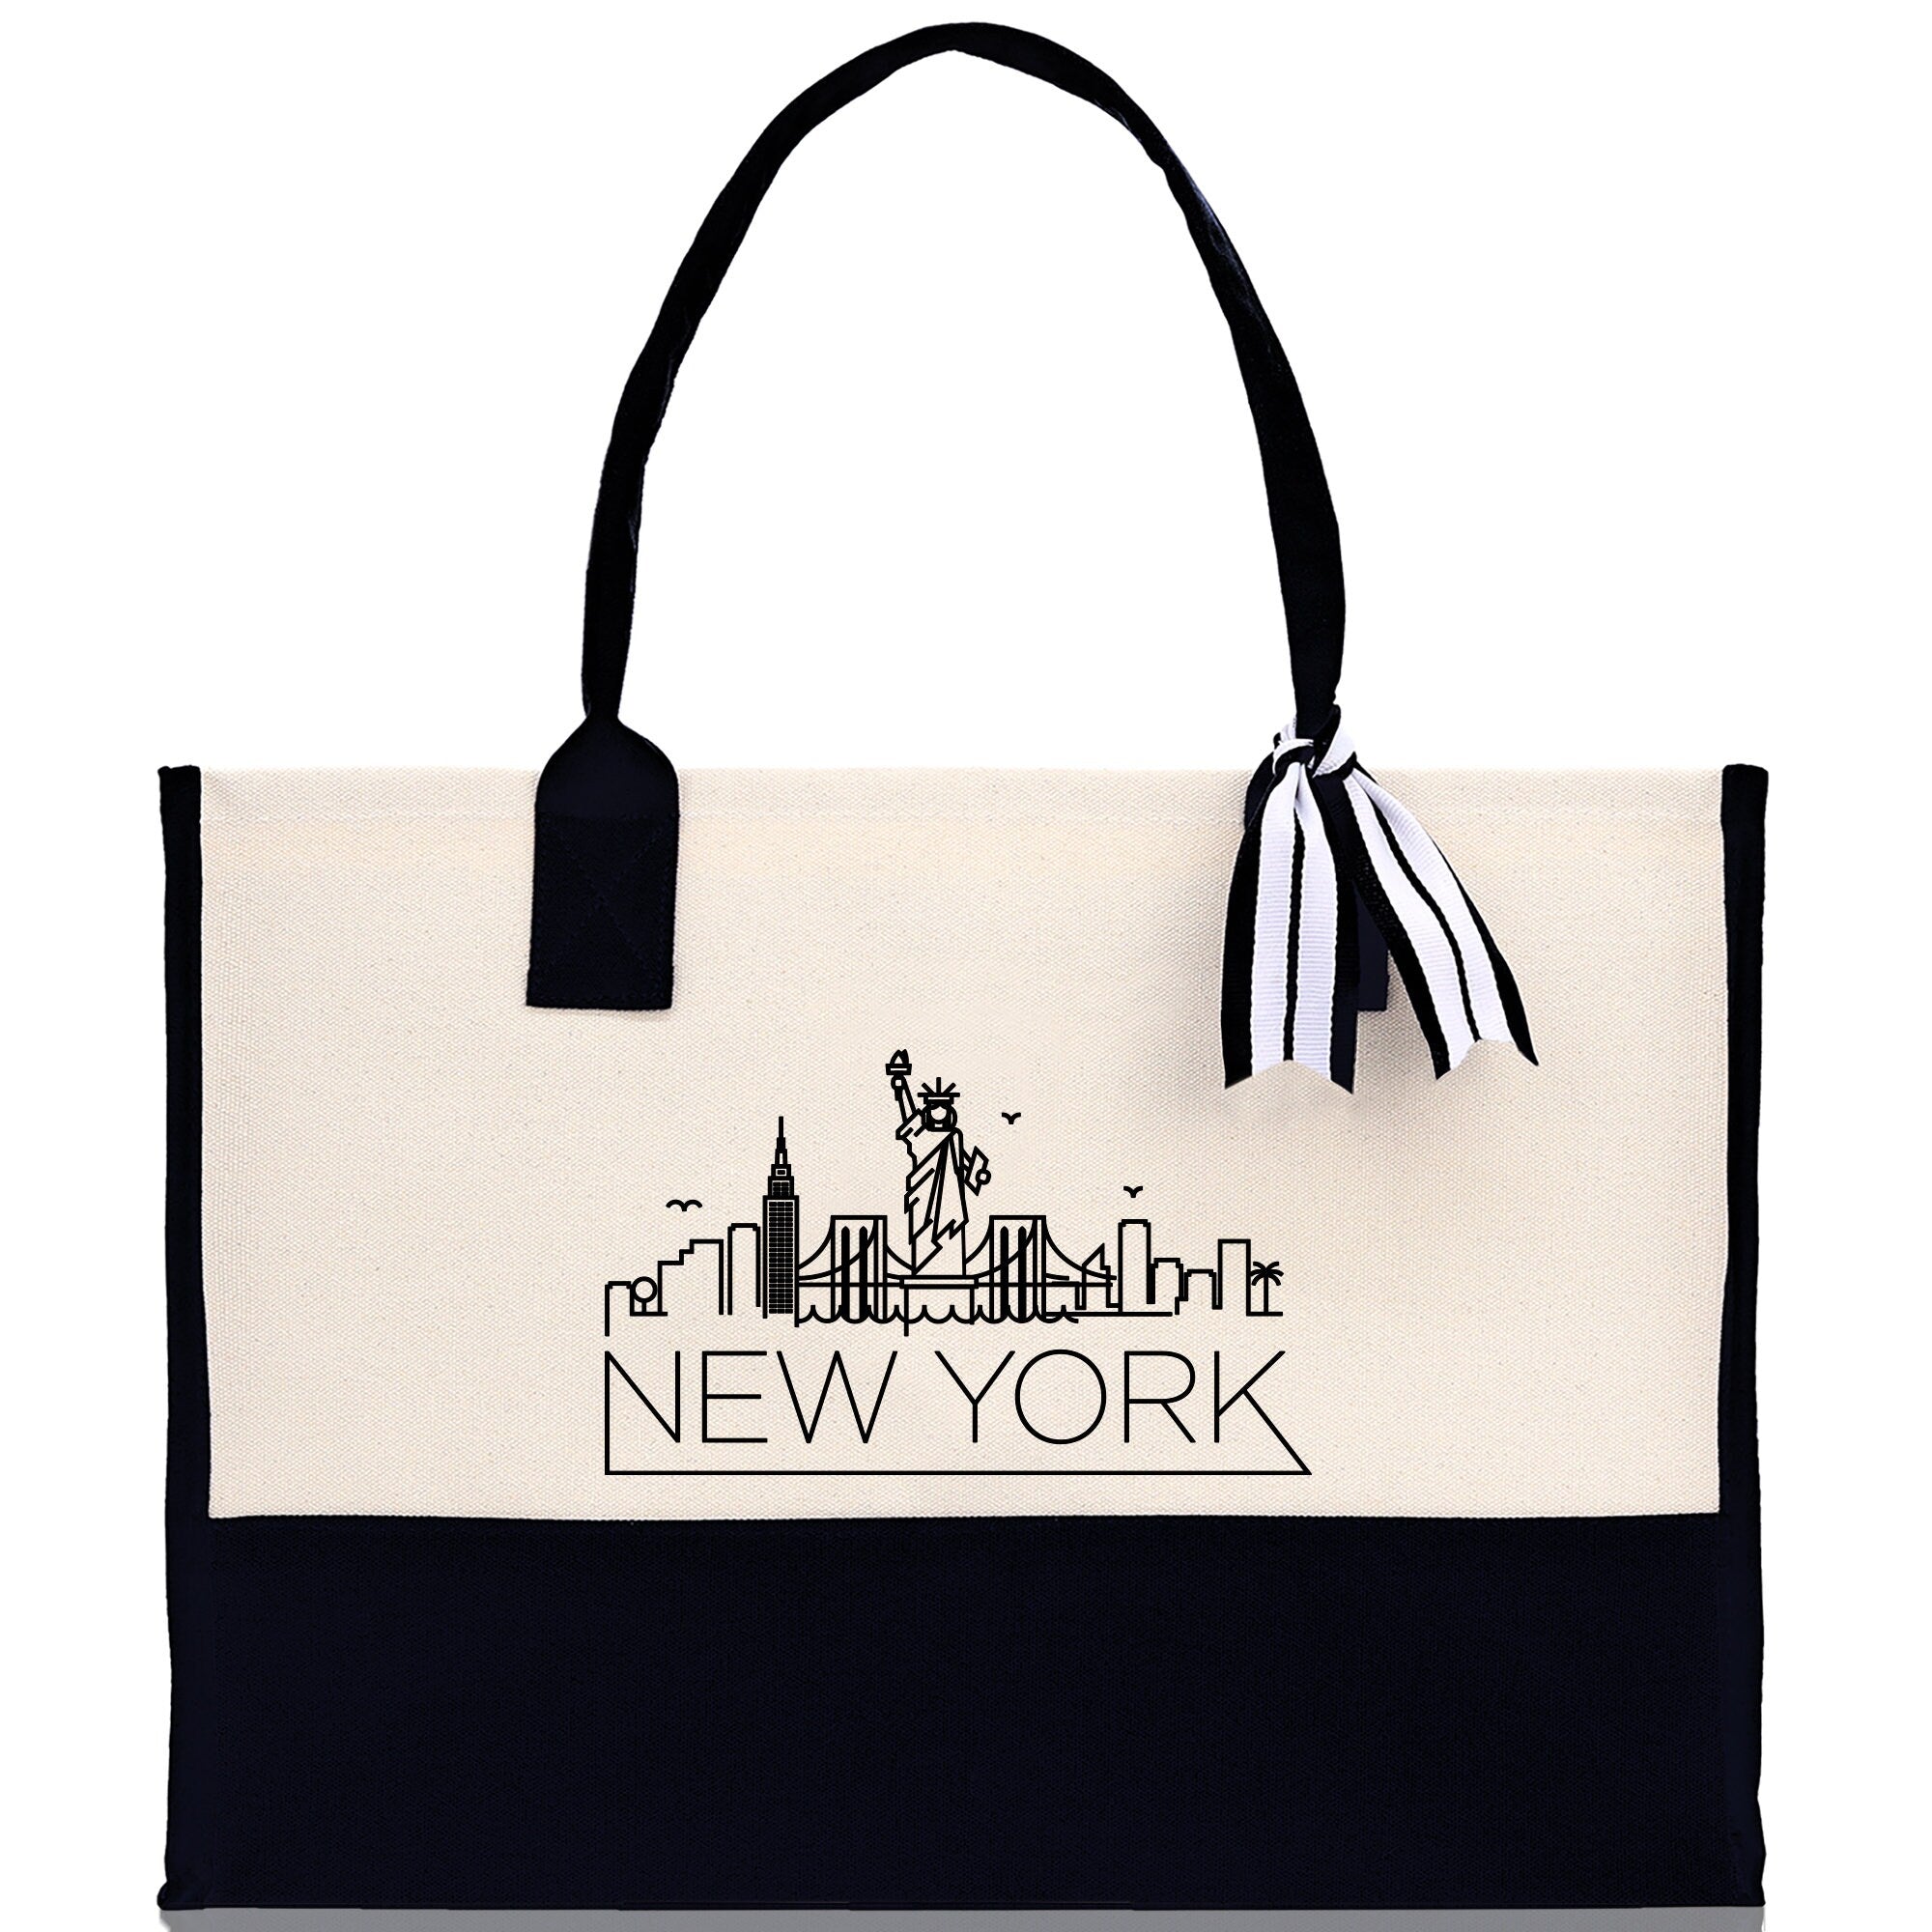 New York Cotton Canvas Tote Bag NY Travel Vacation Tote Employee and Client Gift Wedding Favor Birthday Welcome Tote Bag Bridesmaid Gift